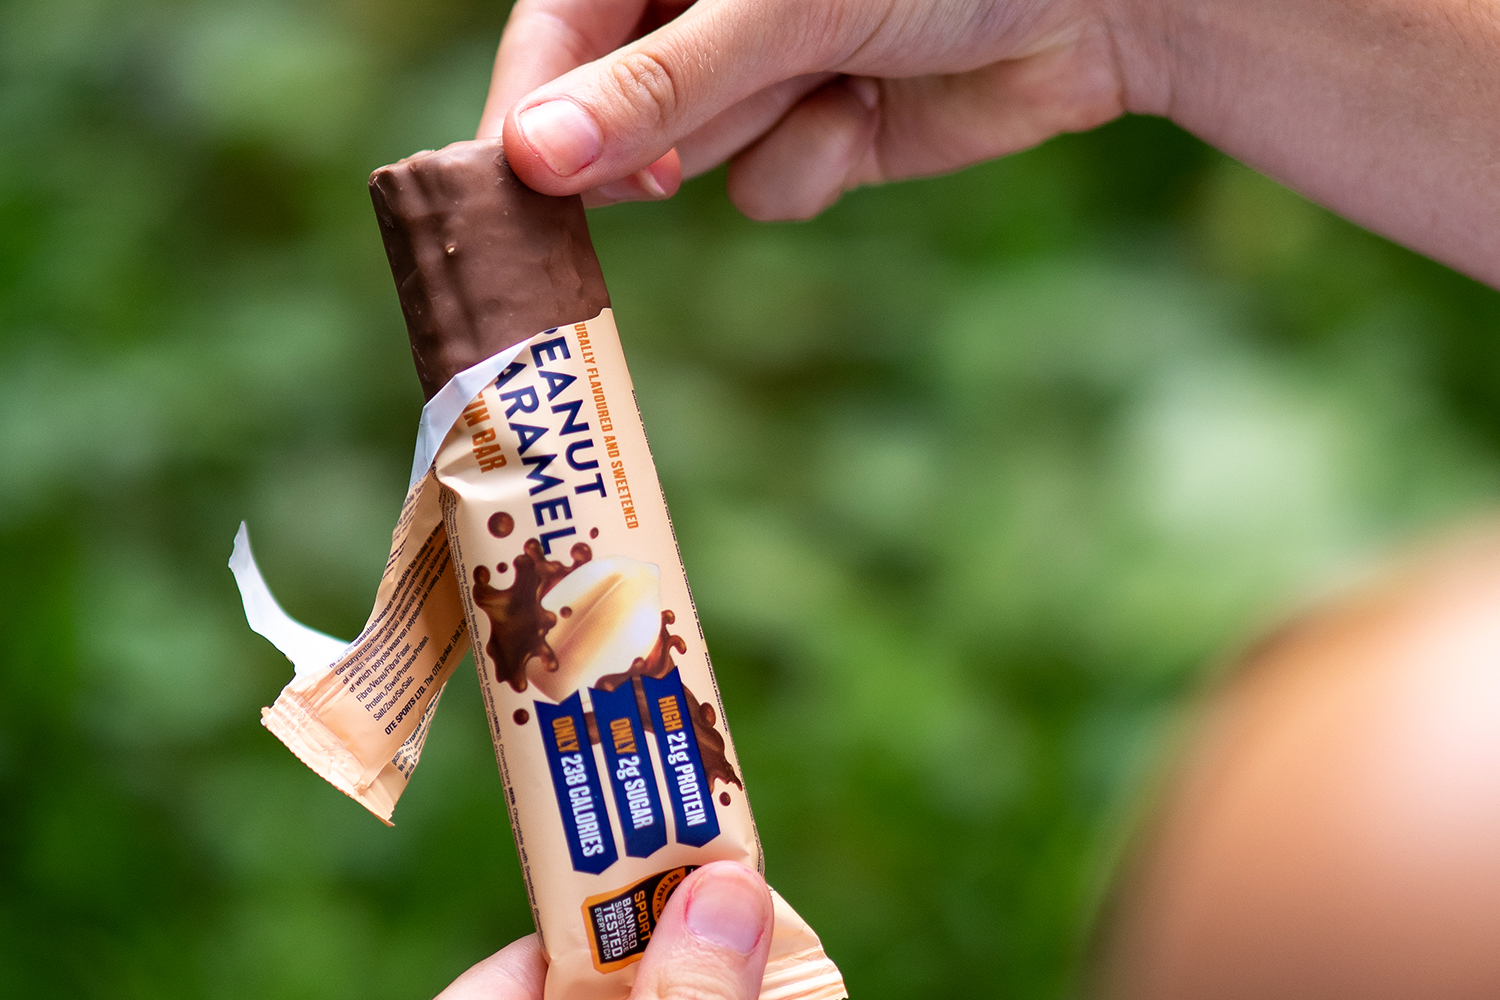 Salted Caramel Anytime Plant Based Protein Bar — OTE Sports